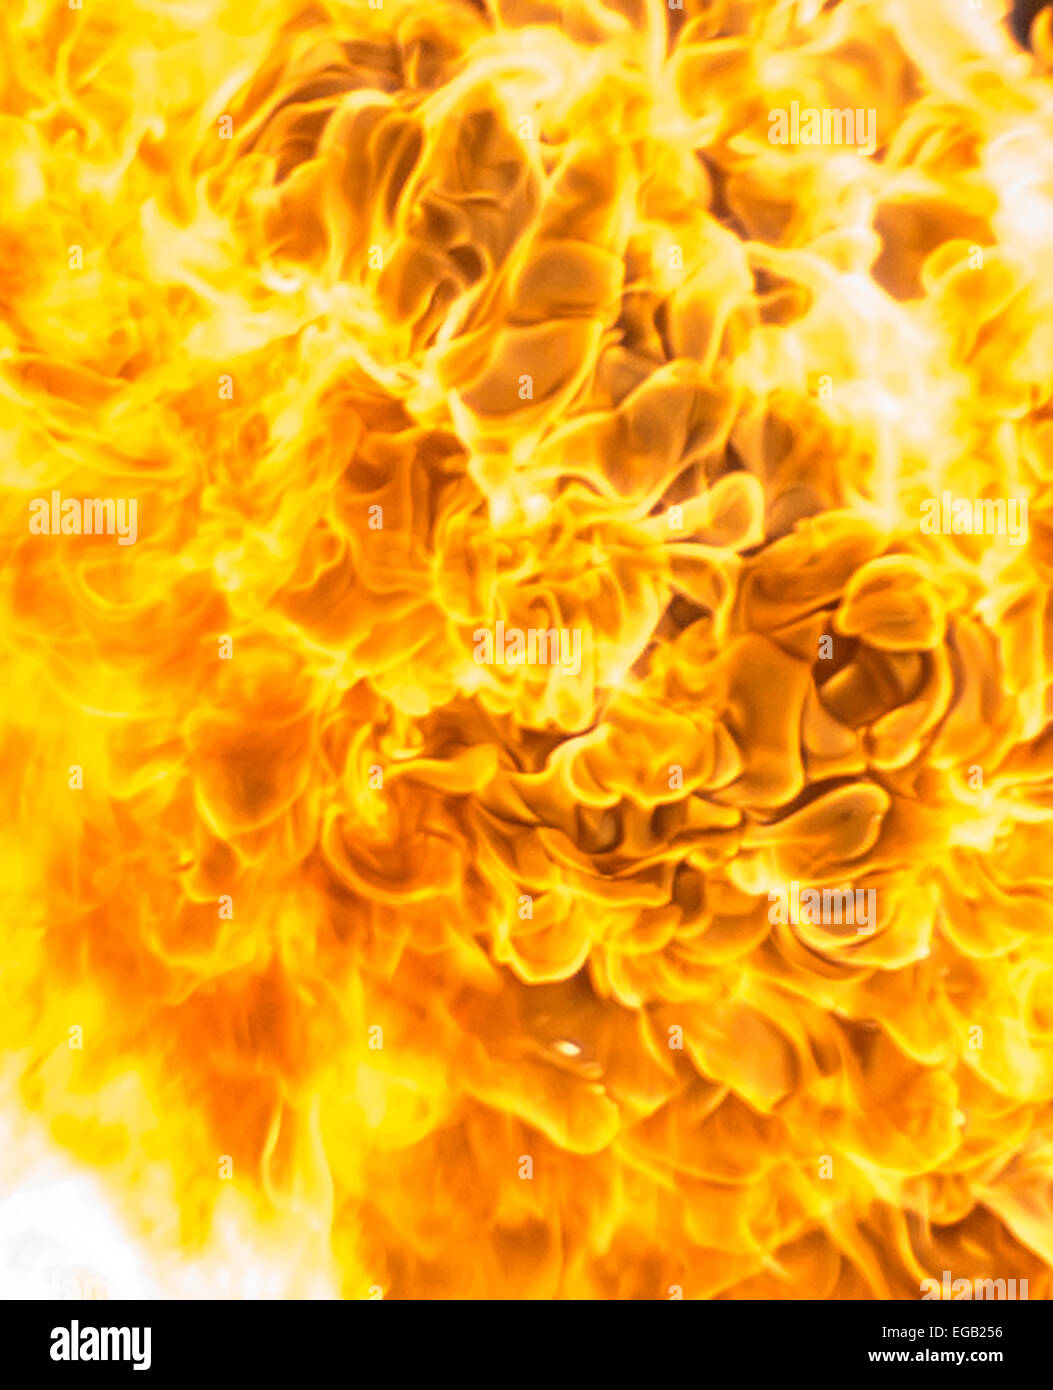 Abstract Flame Background Macro Stock Photo